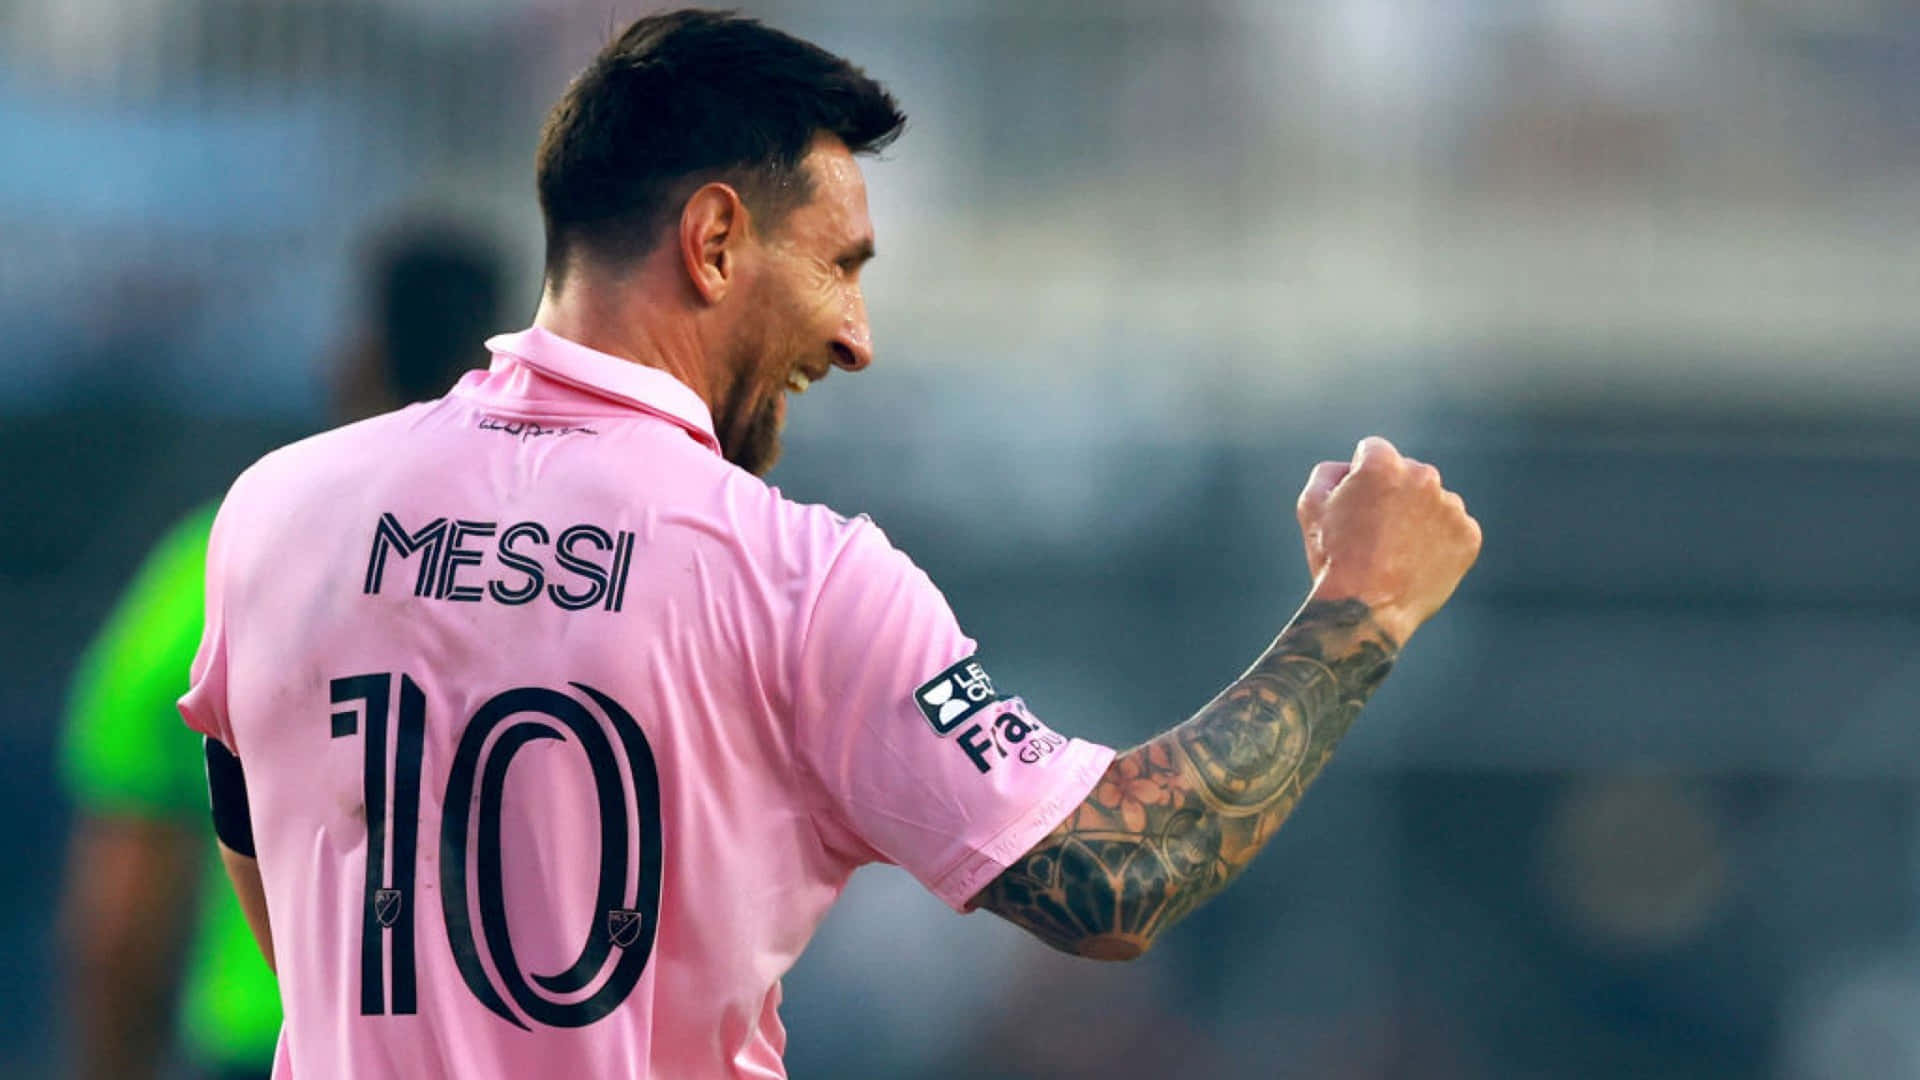 Messiin Pink Jersey Number10 Wallpaper